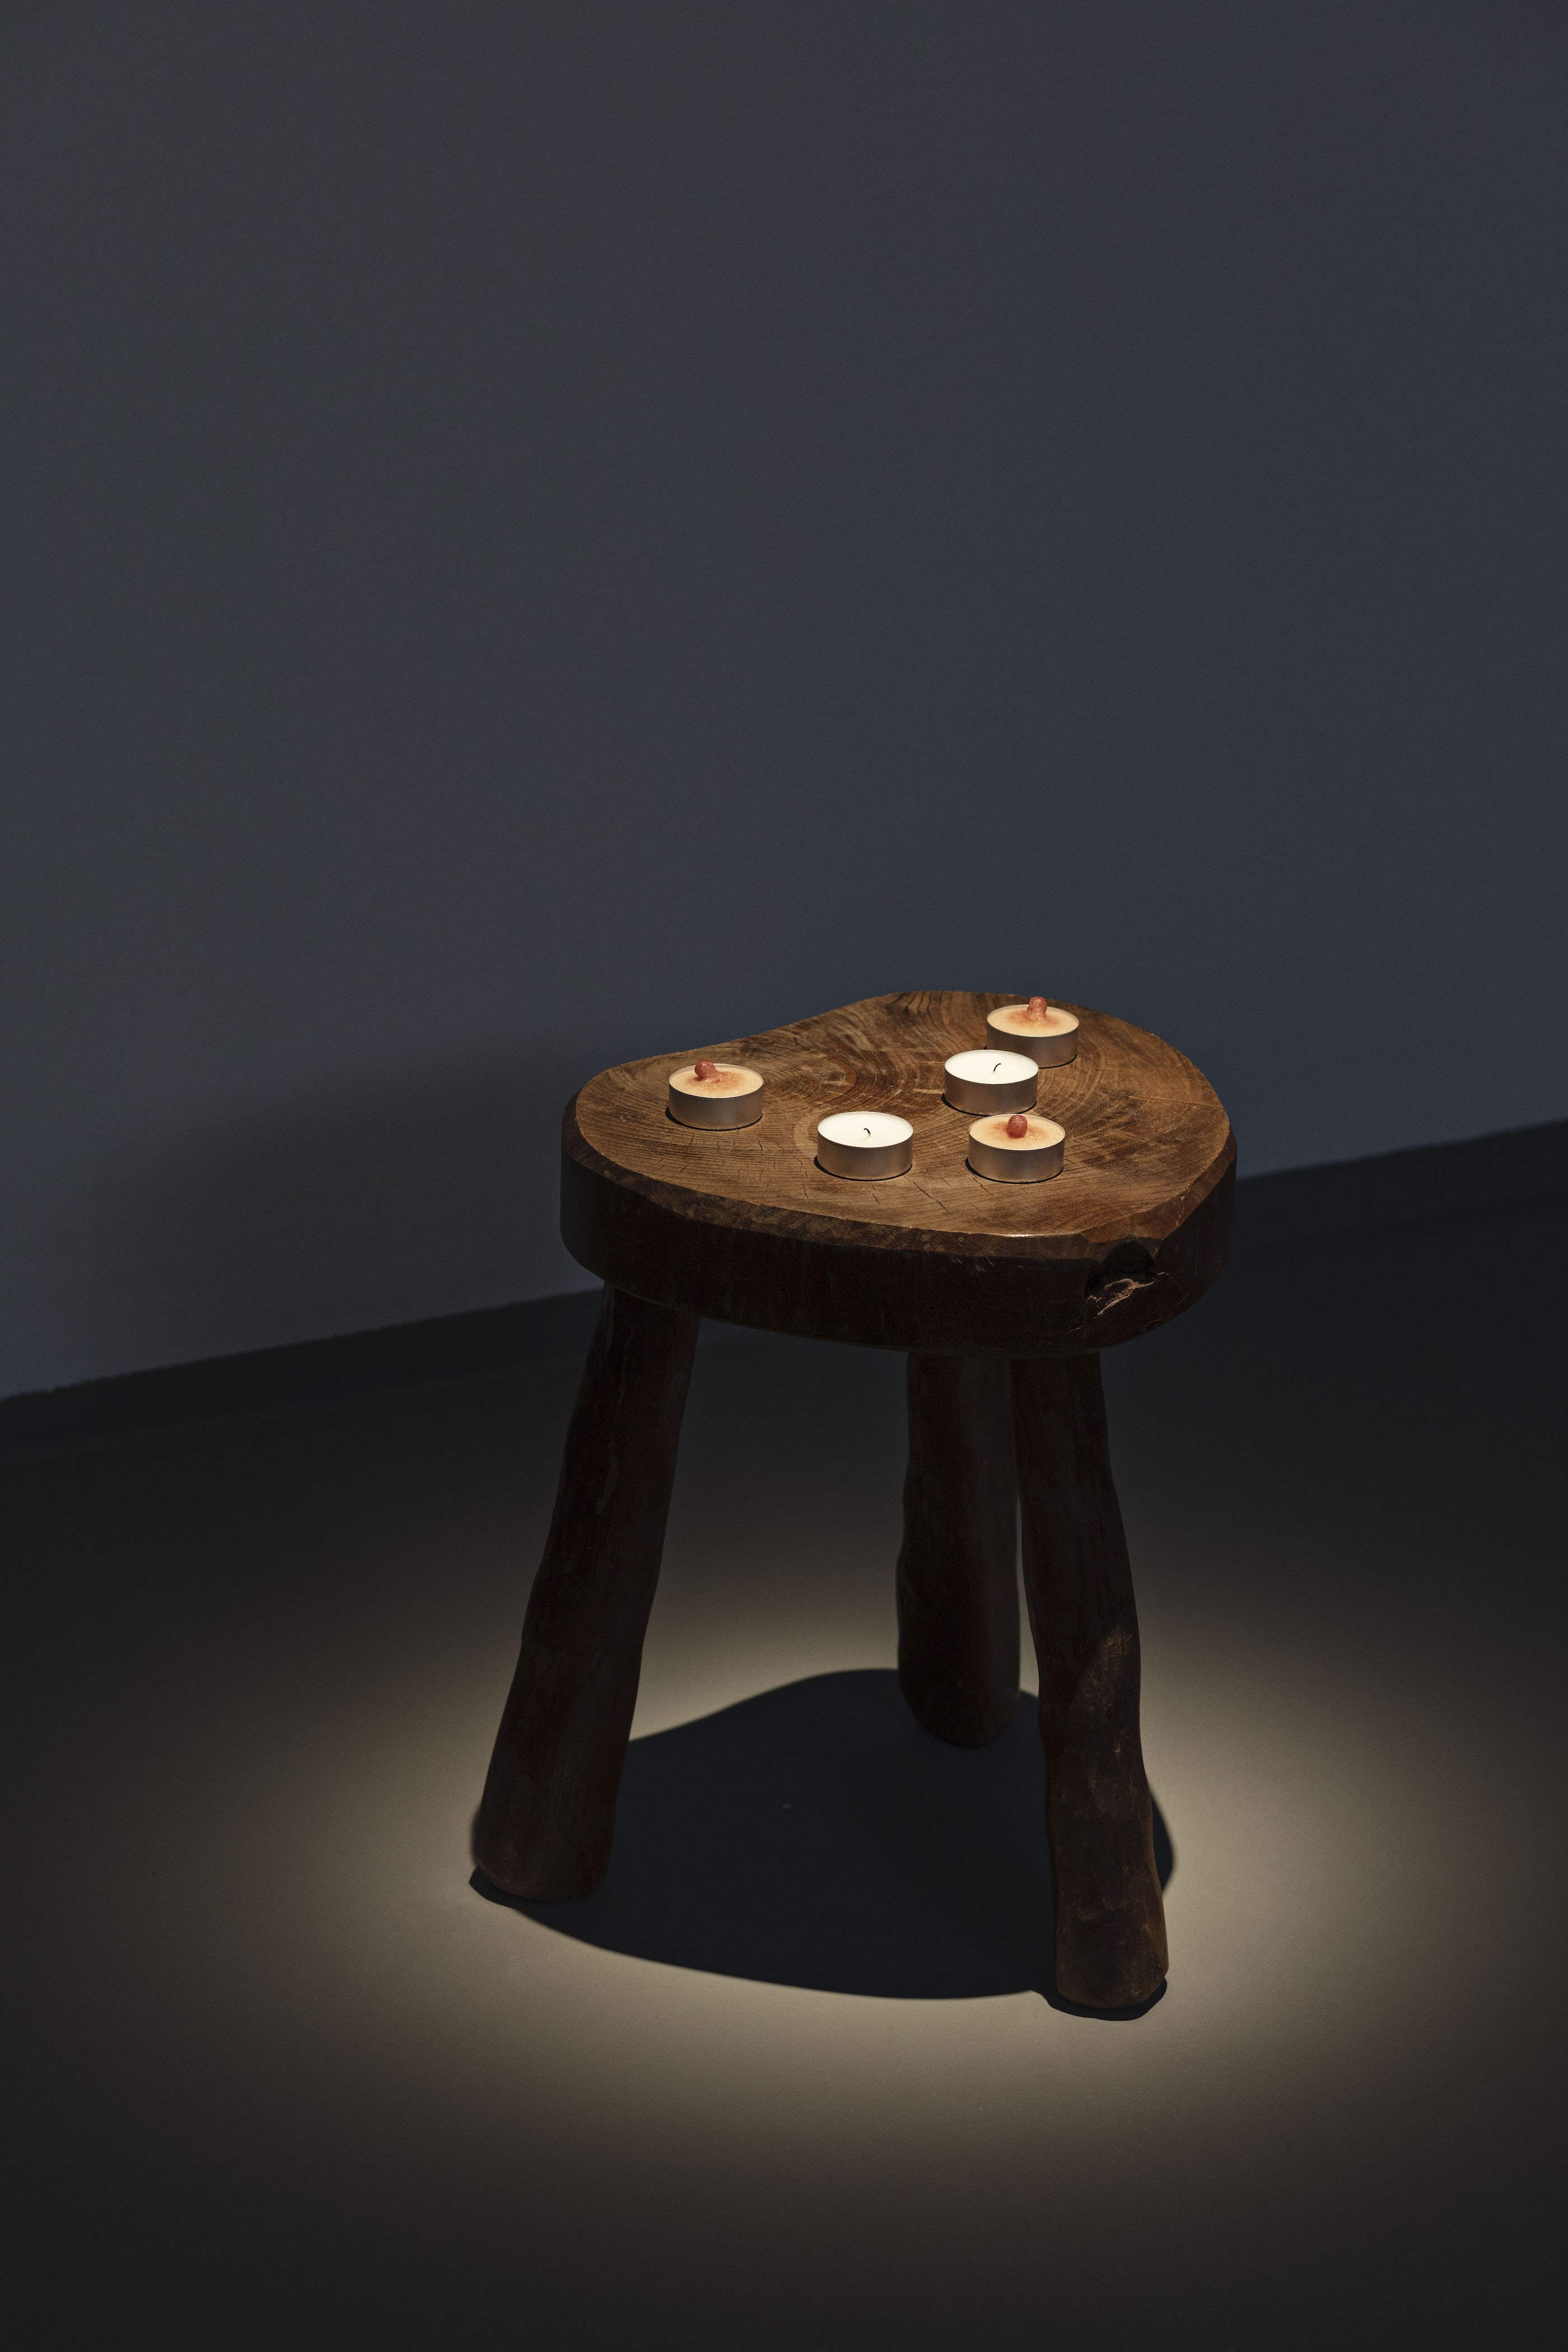 Young-jun Tak: One More Please, 2022. Installation view O—Overgaden, 2023. Wooden milking stool, votive candles, silicon, paint, aluminium, and glue 39 × 35 × 35 cm. Courtesy of the artist.  Photo: Laura Stamer